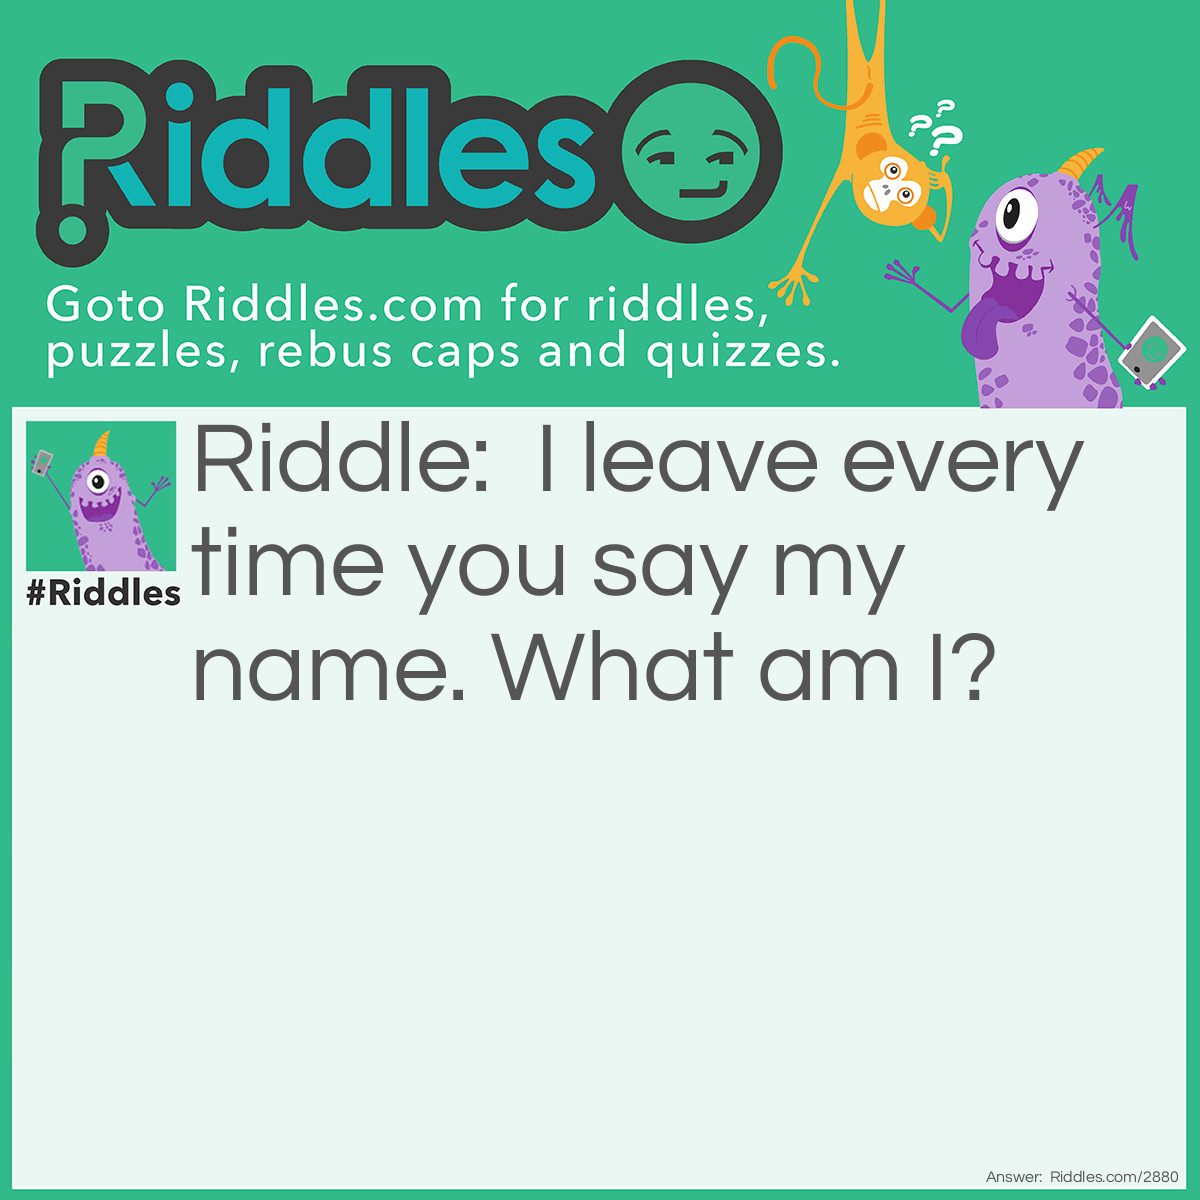 Riddle: I leave every time you say my name. What am I? Answer: Silence.